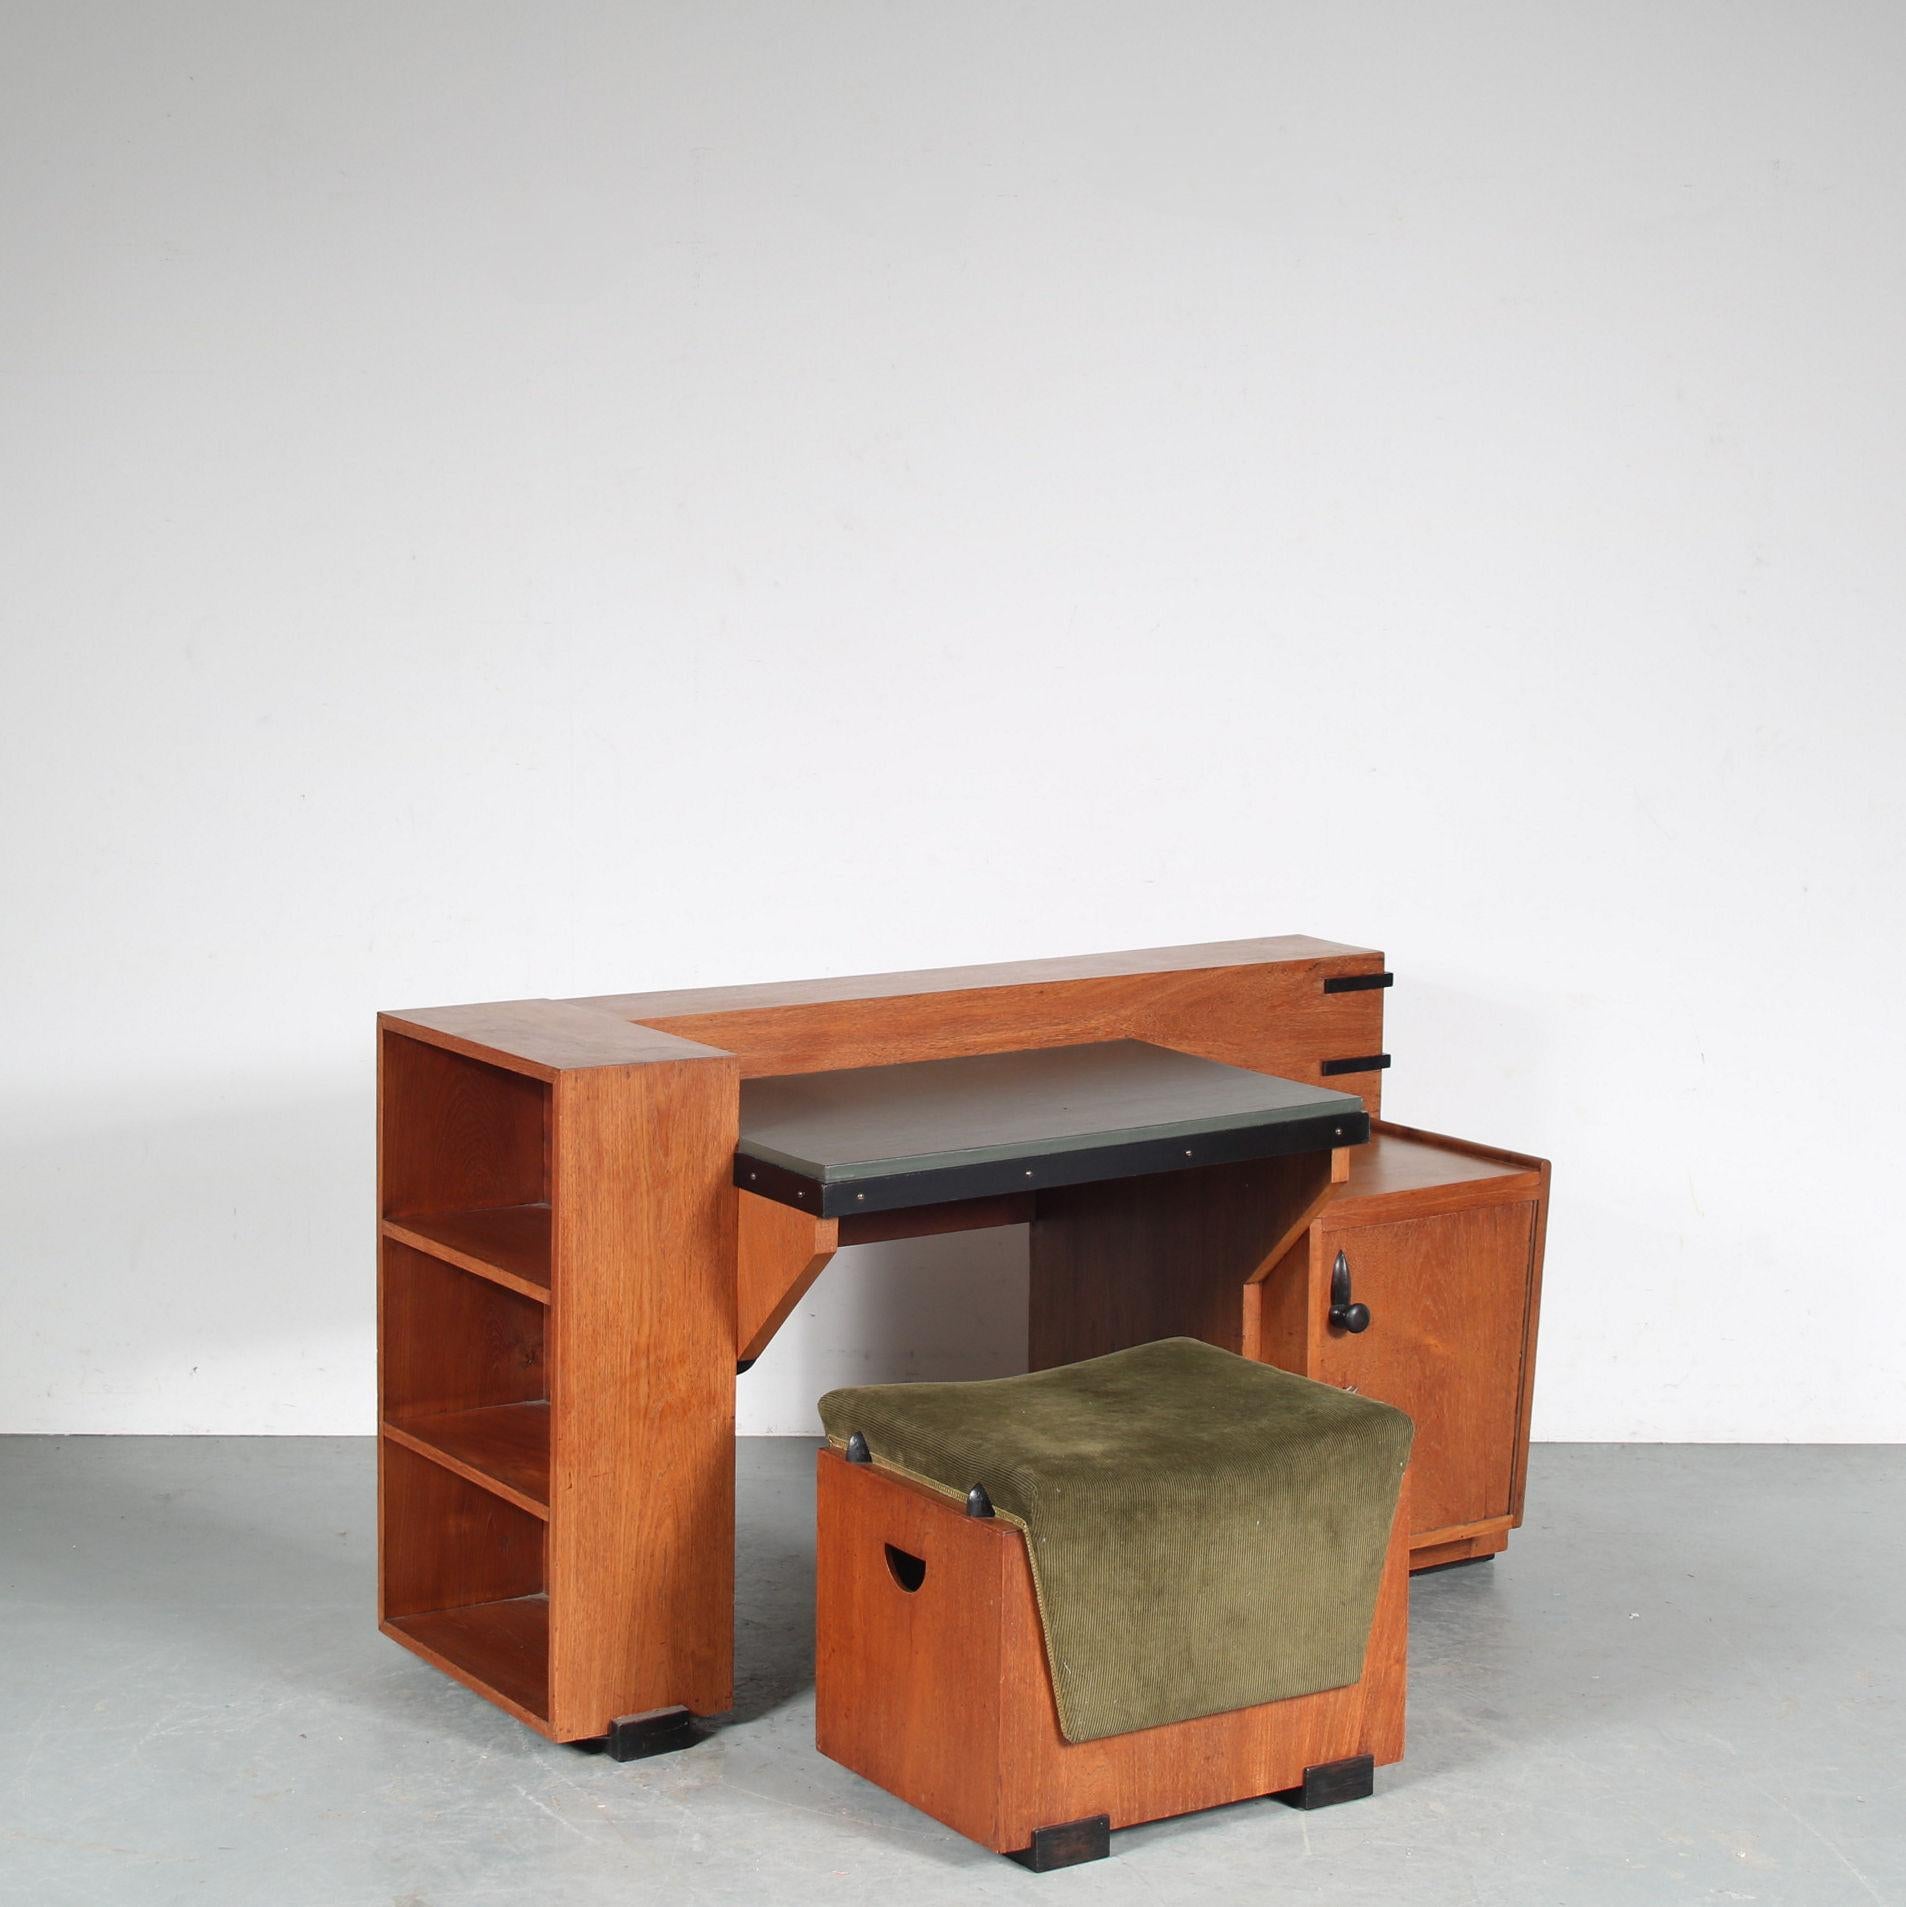 A colonial style desk / dressing table designed by Toko van der Pol in Java, Indonesia around 1930.

The rectangular and asymmetrical shape of the desk is inspired by the New Hague School (1925-1940). Made of high quality teak wood in a nice brown